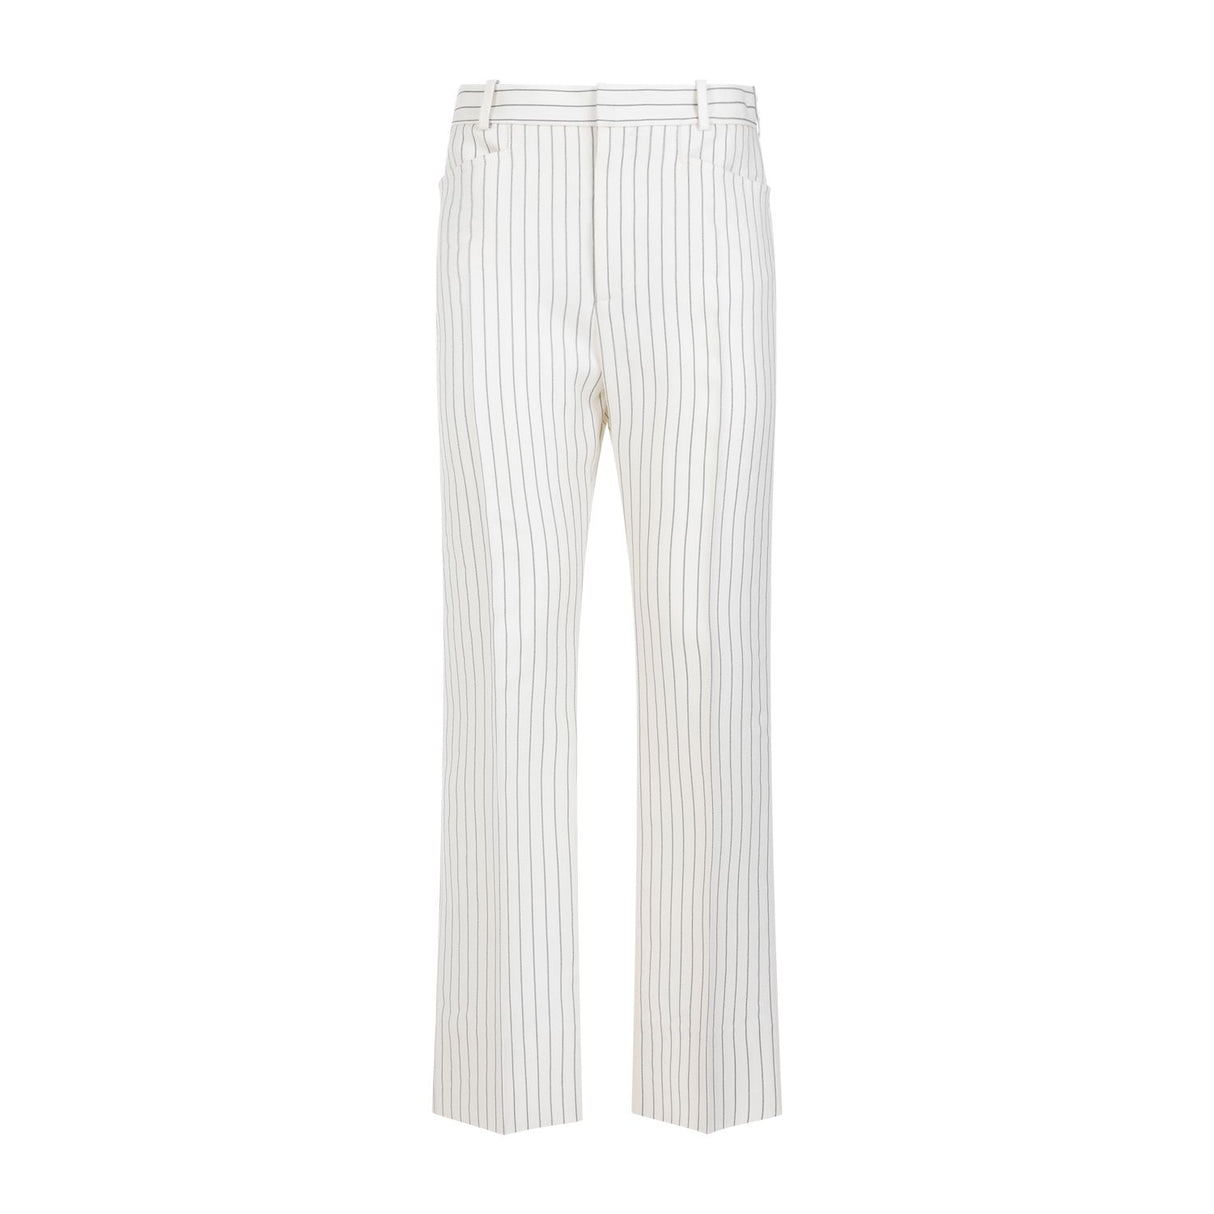 TOM FORD Tailored Pants in Nude & Neutrals for Women - SS24 Collection